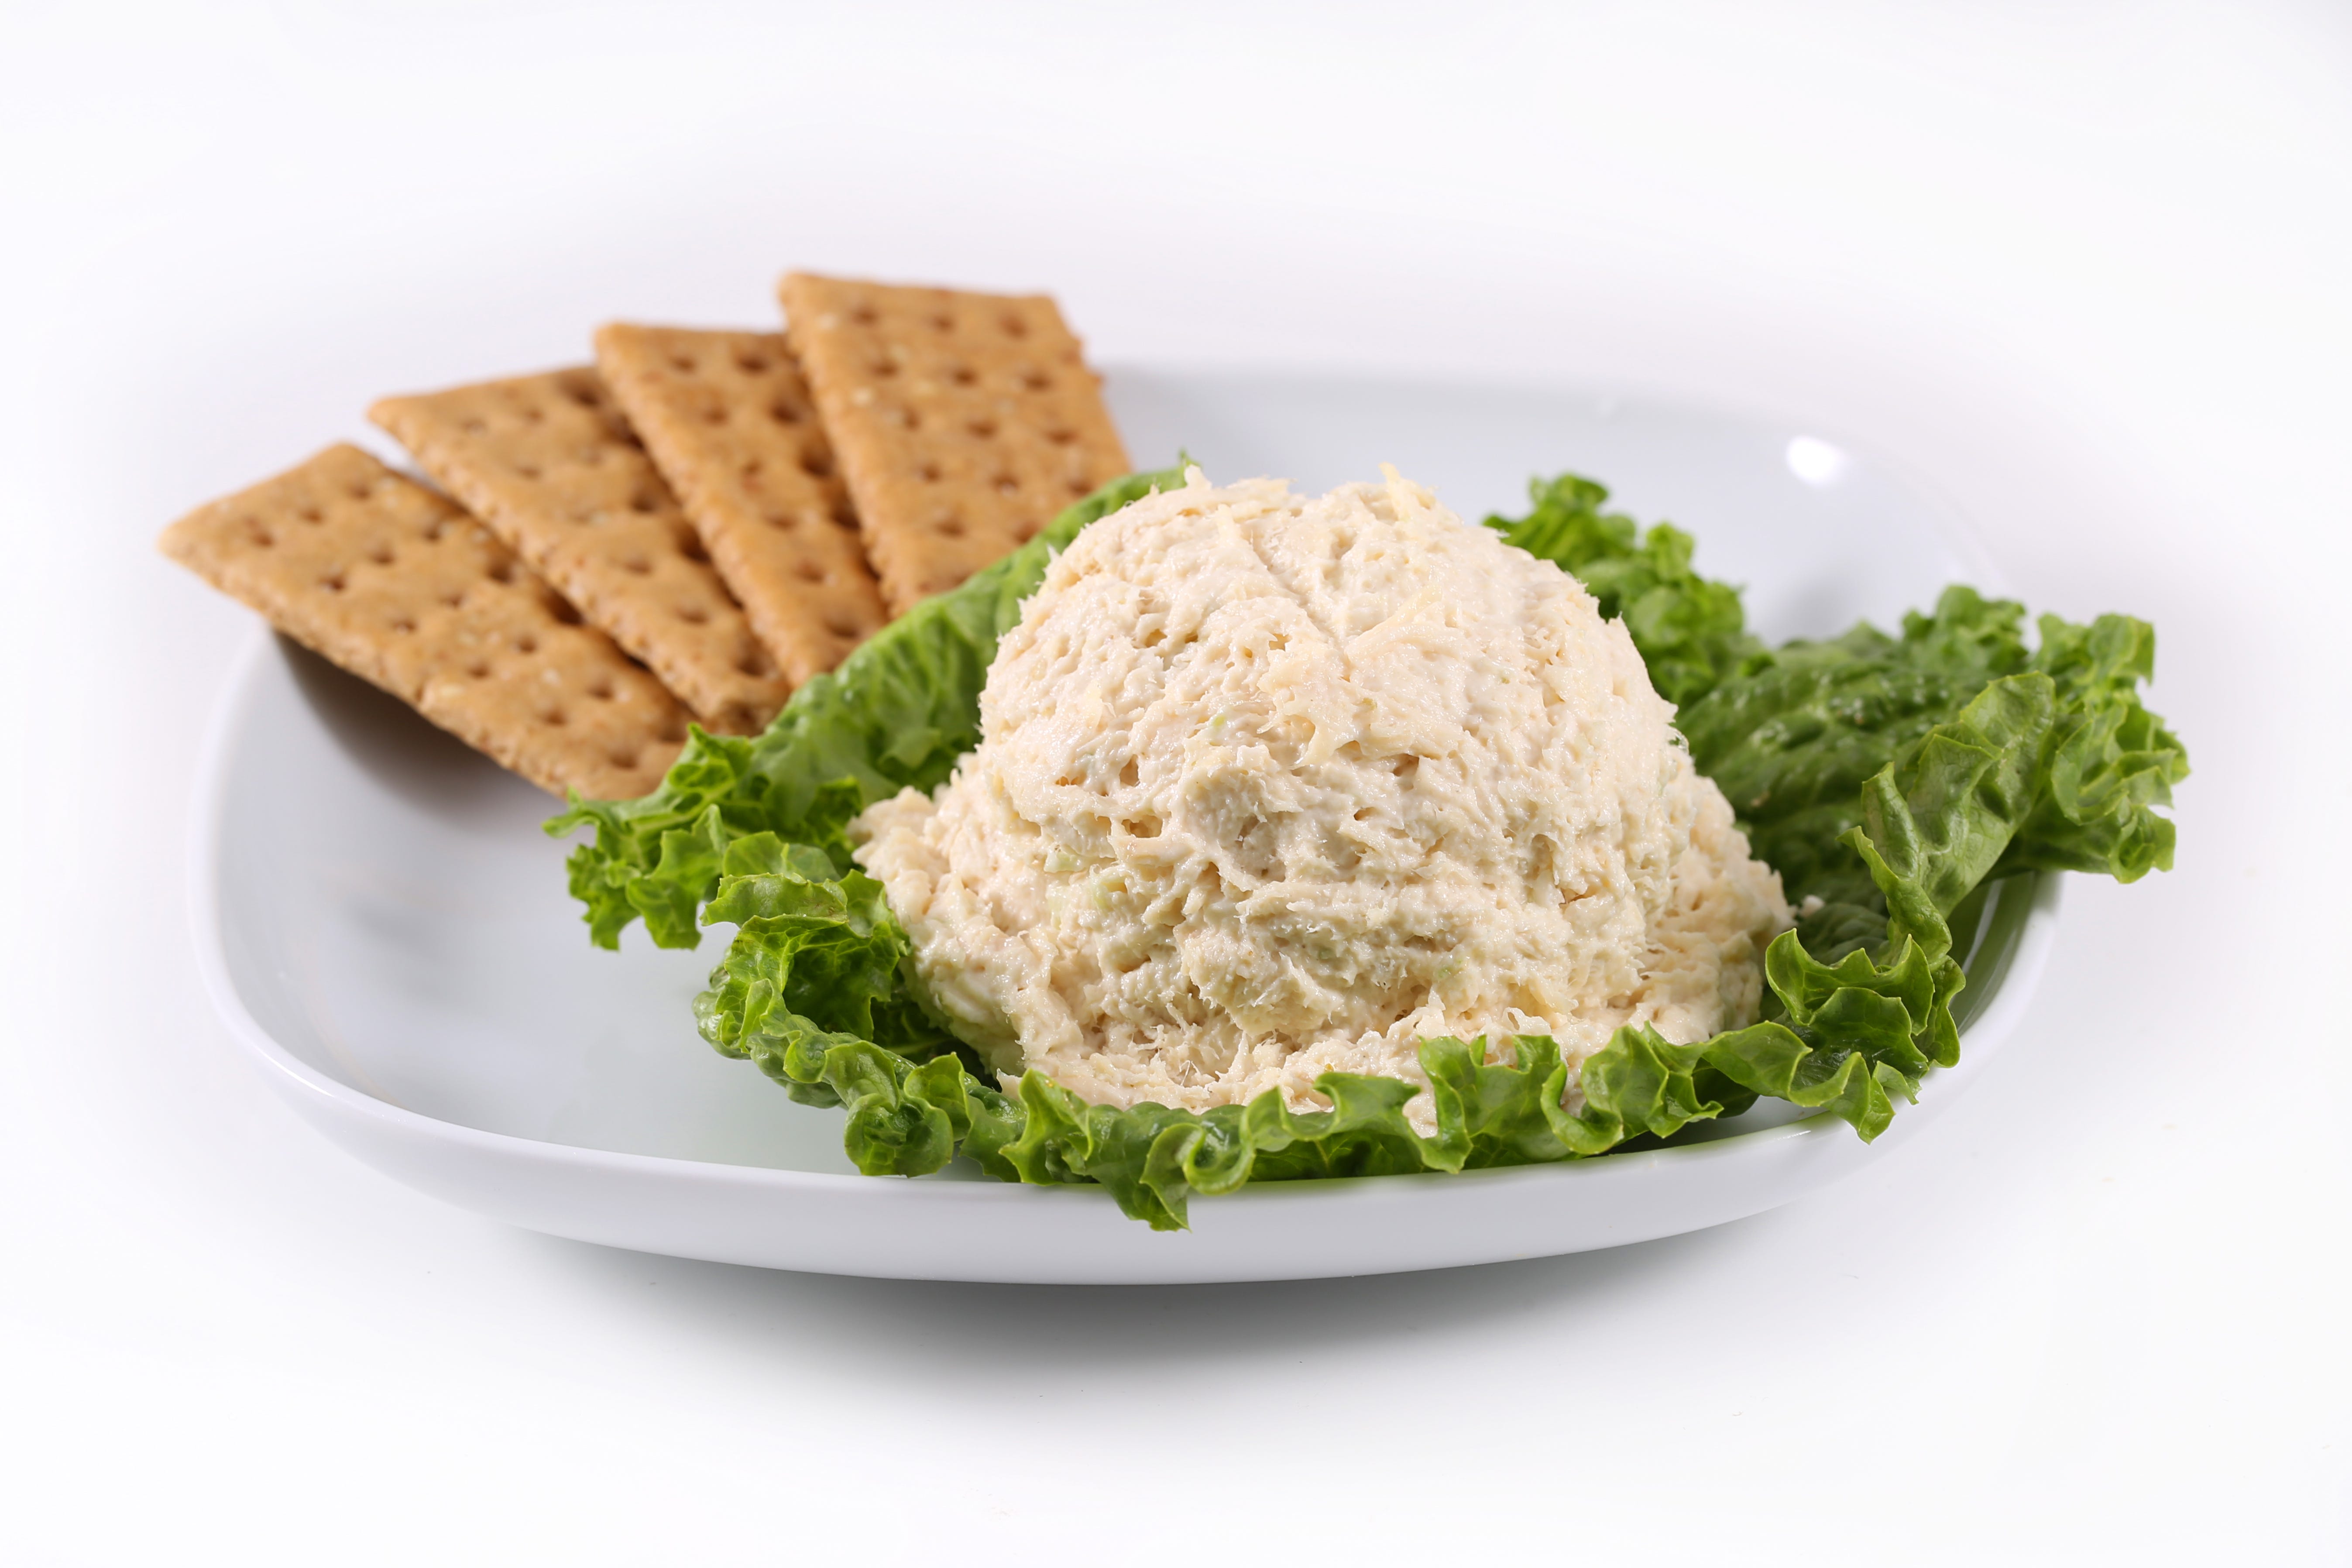 Chain offering a dozen kinds of chicken salad opening 4 restaurants in Indianapolis